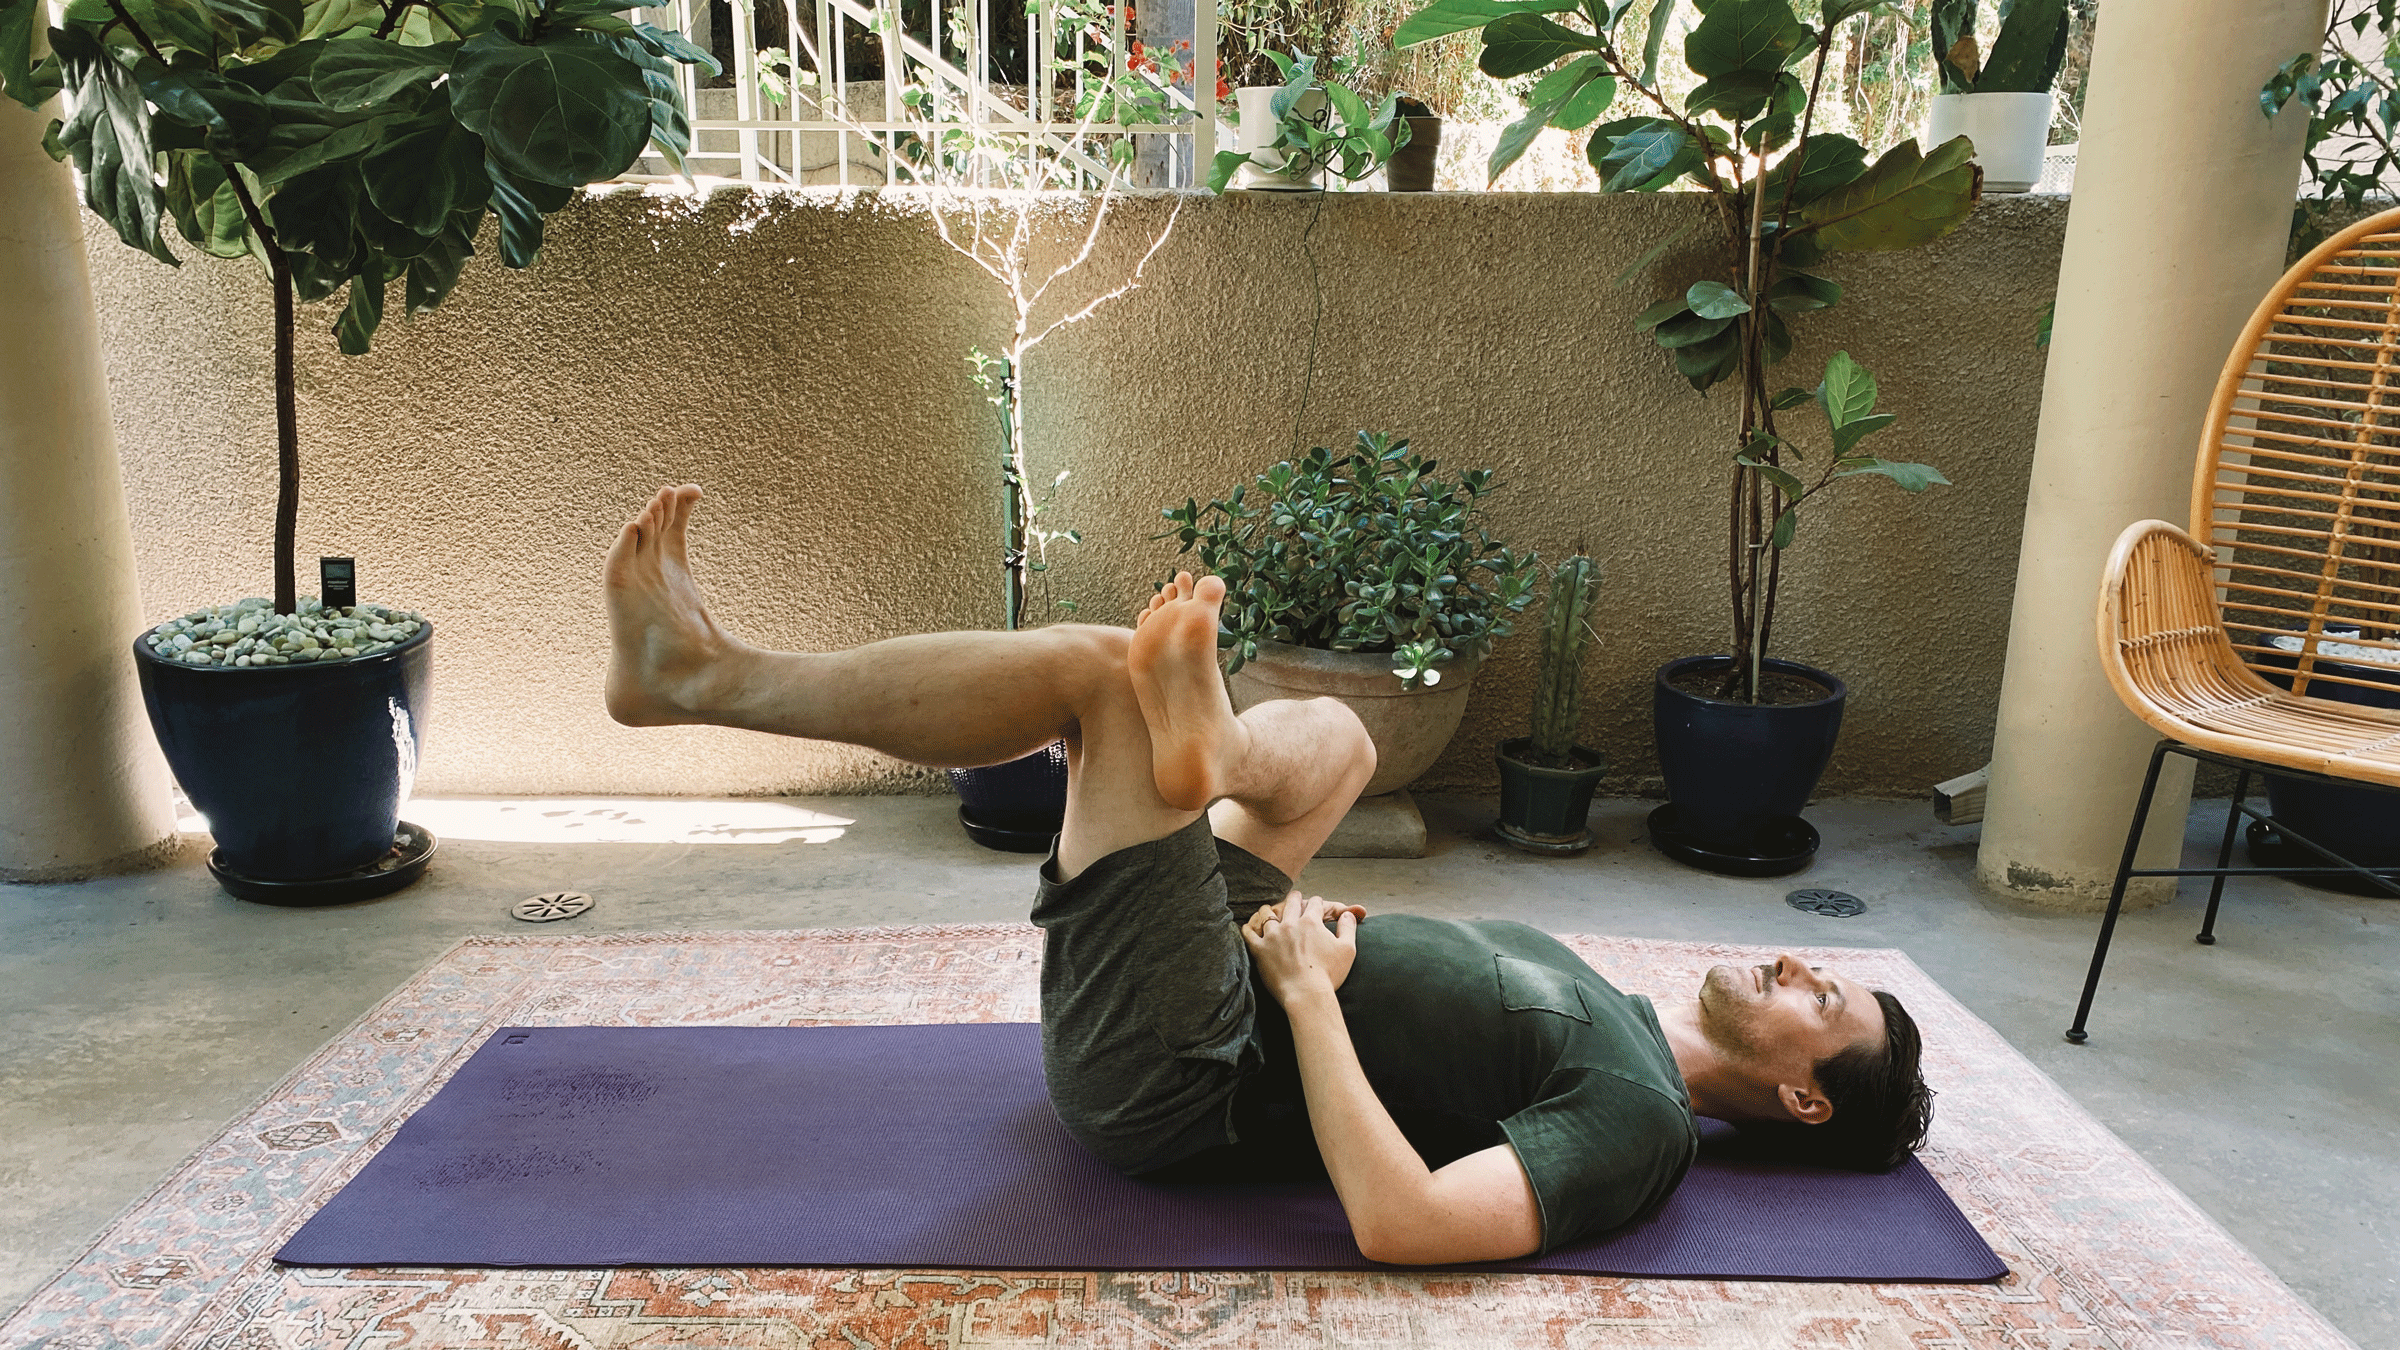 Reclining Postures  Steps  Benefits  Learn Yogasanas Online  Yoga and  Kerala